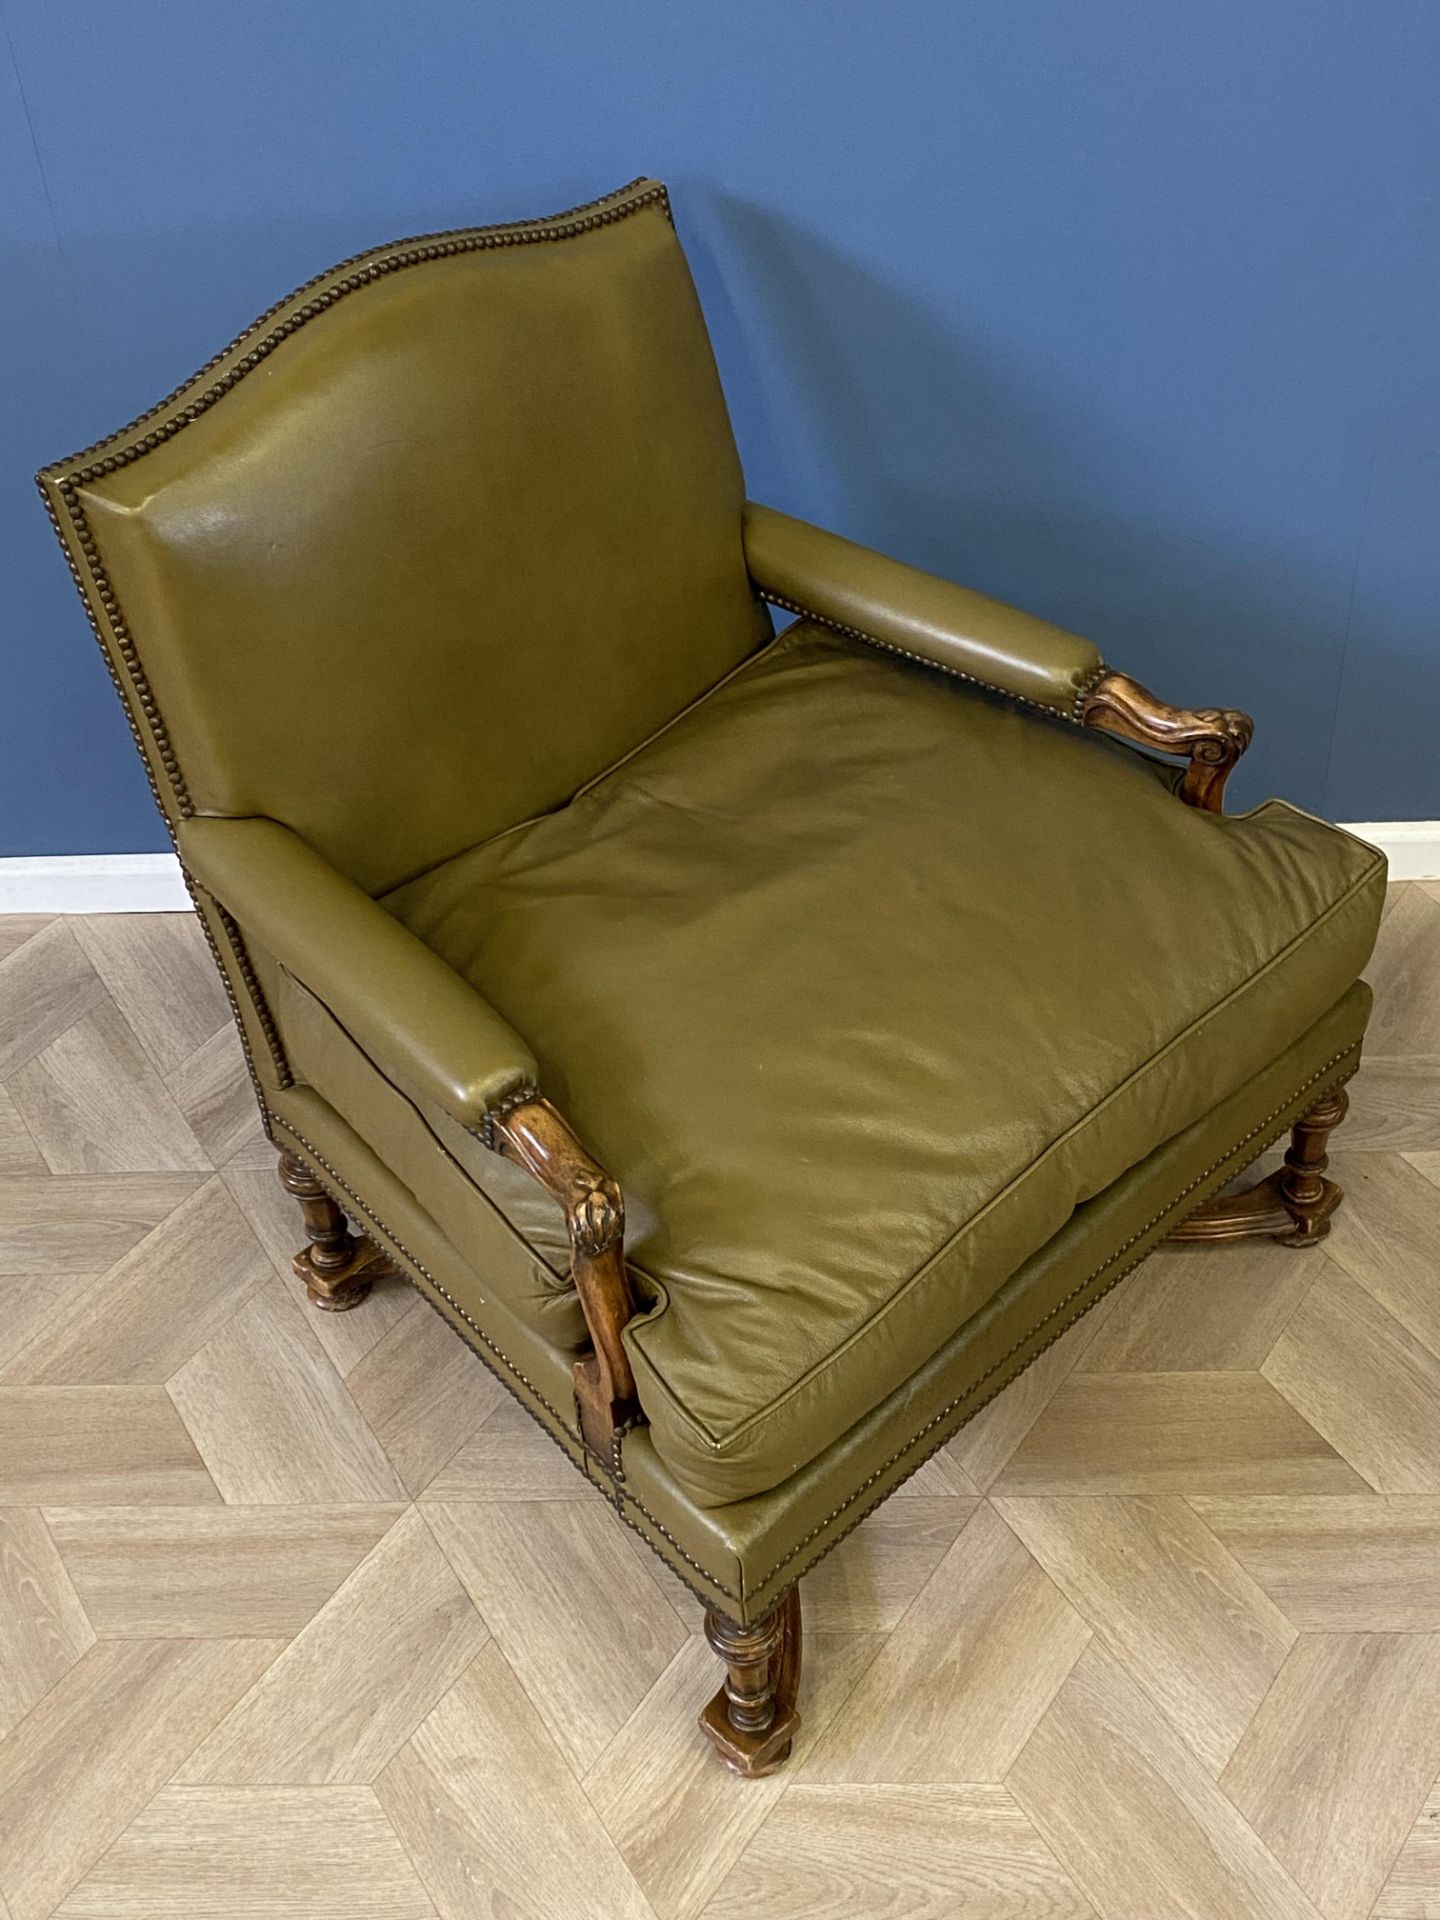 Pair of green leather armchairs - Image 6 of 12